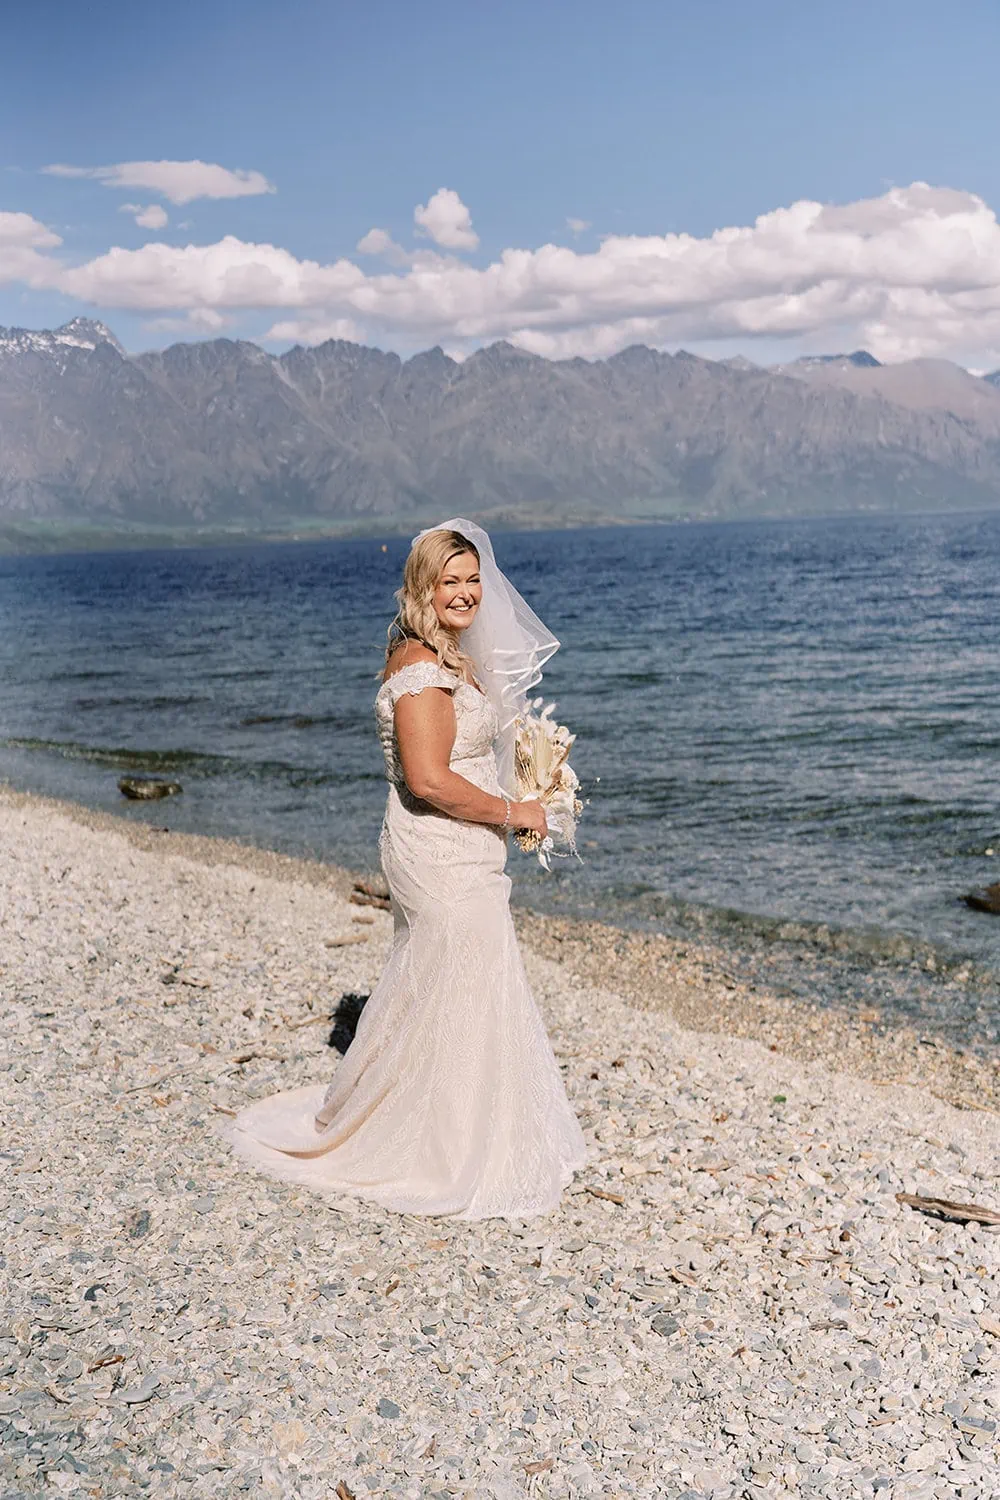 Queenstown Elopement Heli Wedding Photographer クイーンズタウン結婚式 | Melissa, a bride, standing on a beach with mountains in the background at Kamana Lakehouse Queenstown for her elopement with Scott.